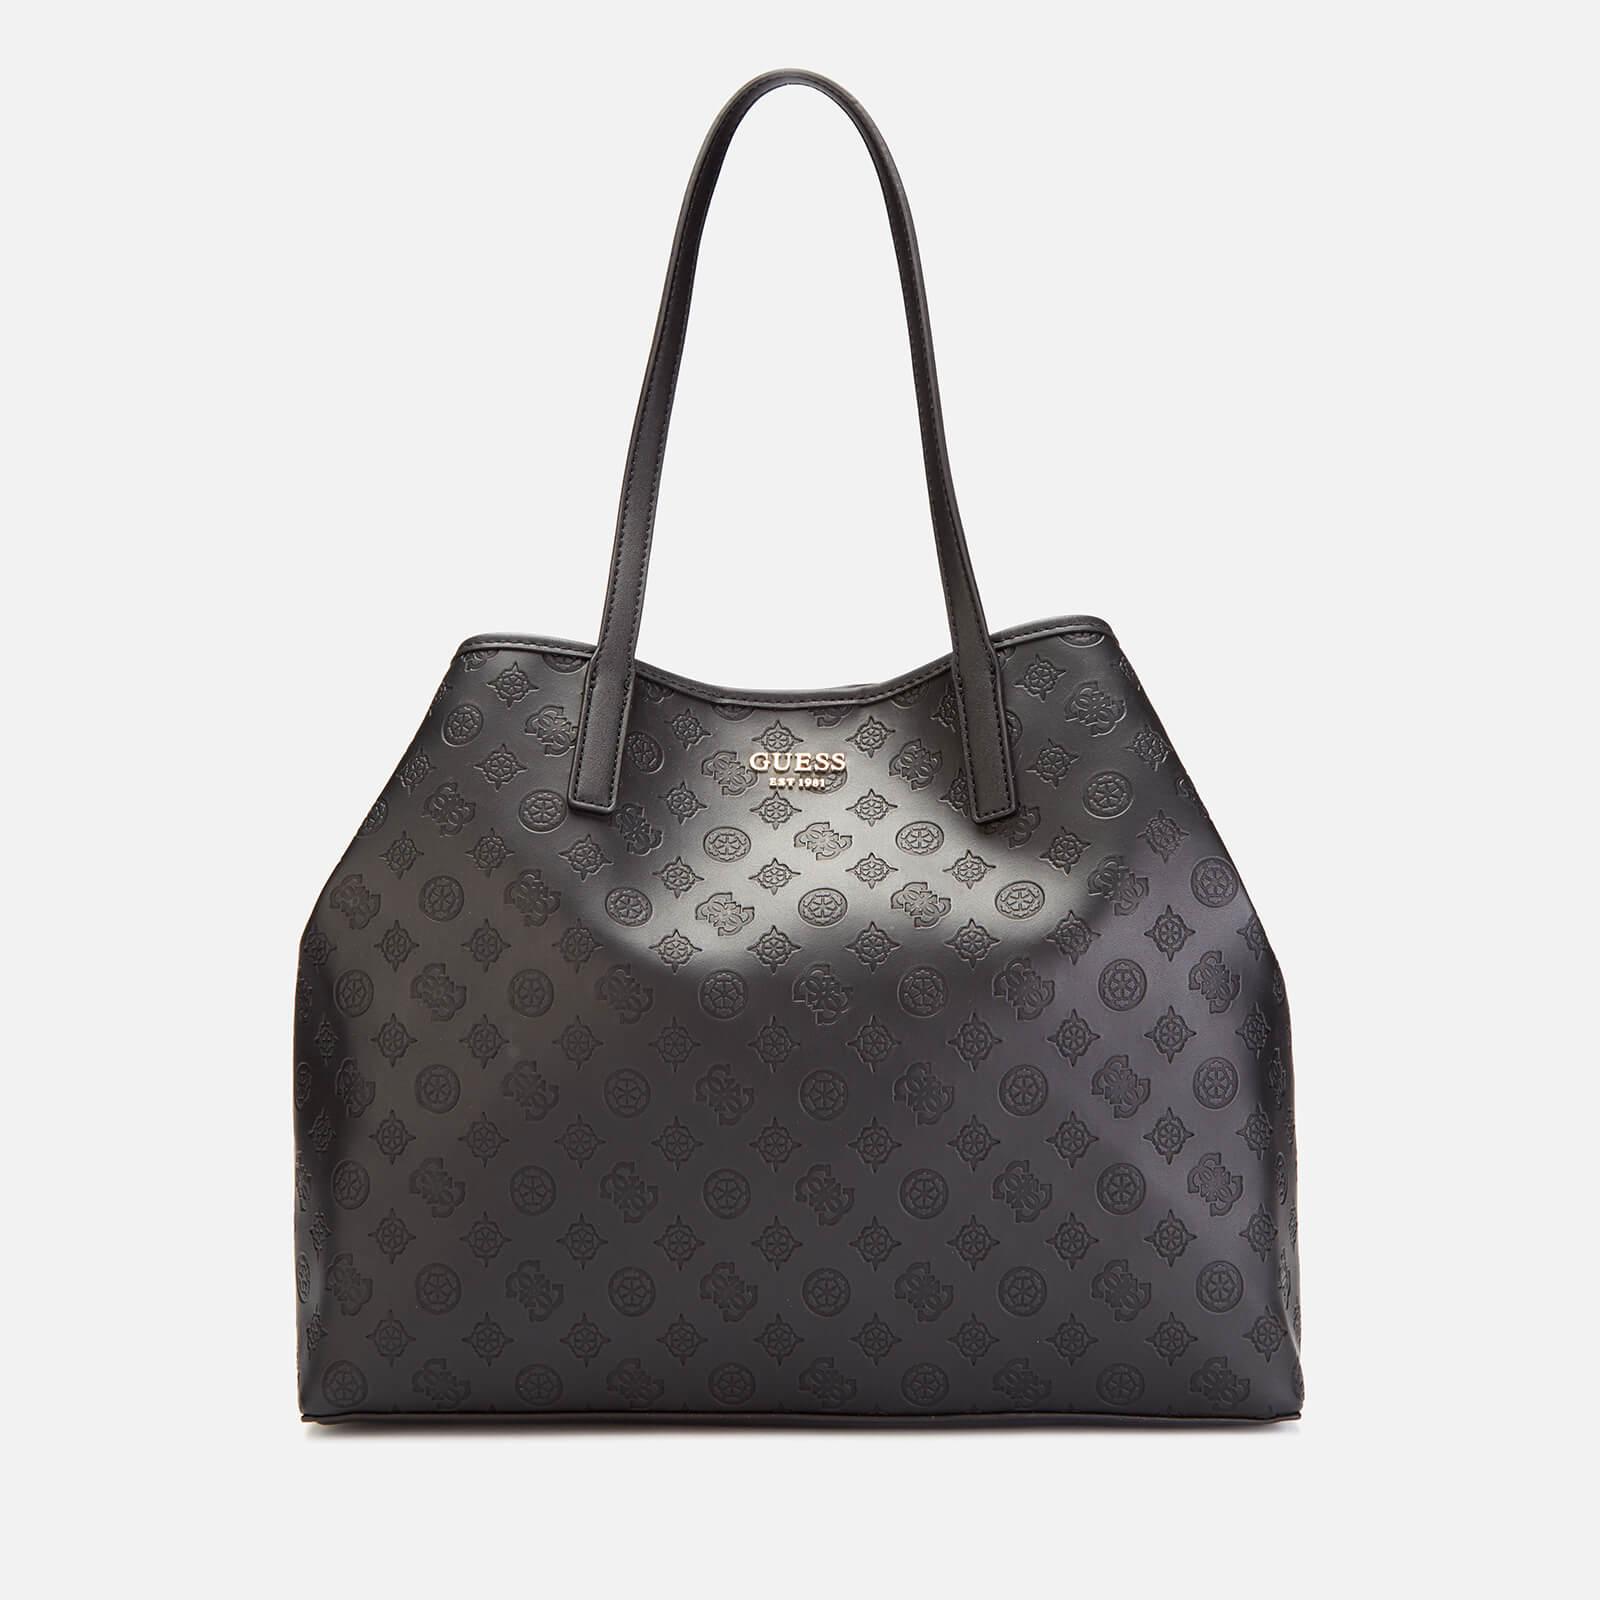 Guess Vikky Large Tote Bag in Black | Lyst